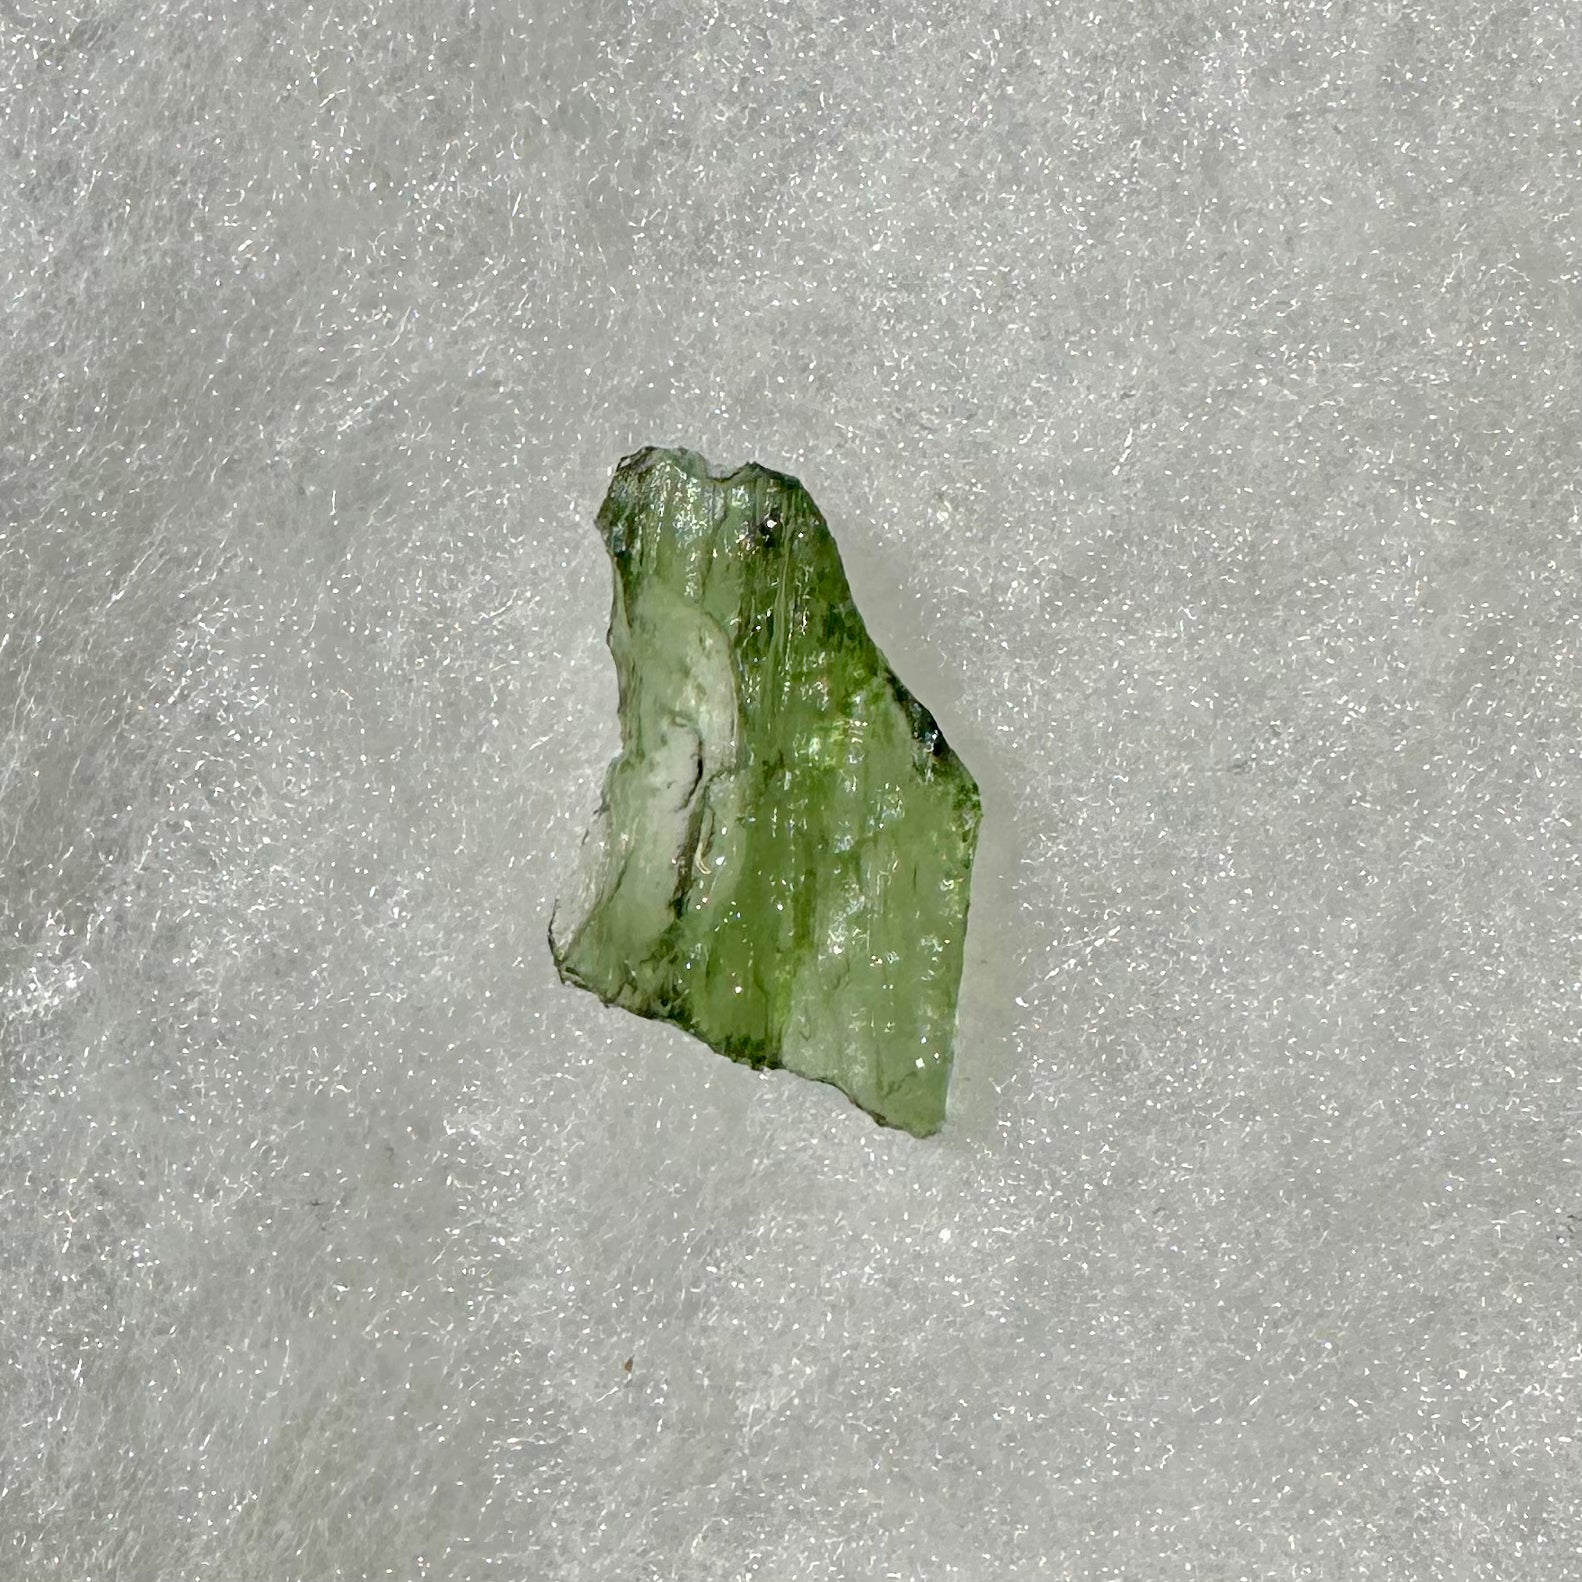 Moldavite Specimens Collection Pieces up to 10g - The Harmony Store